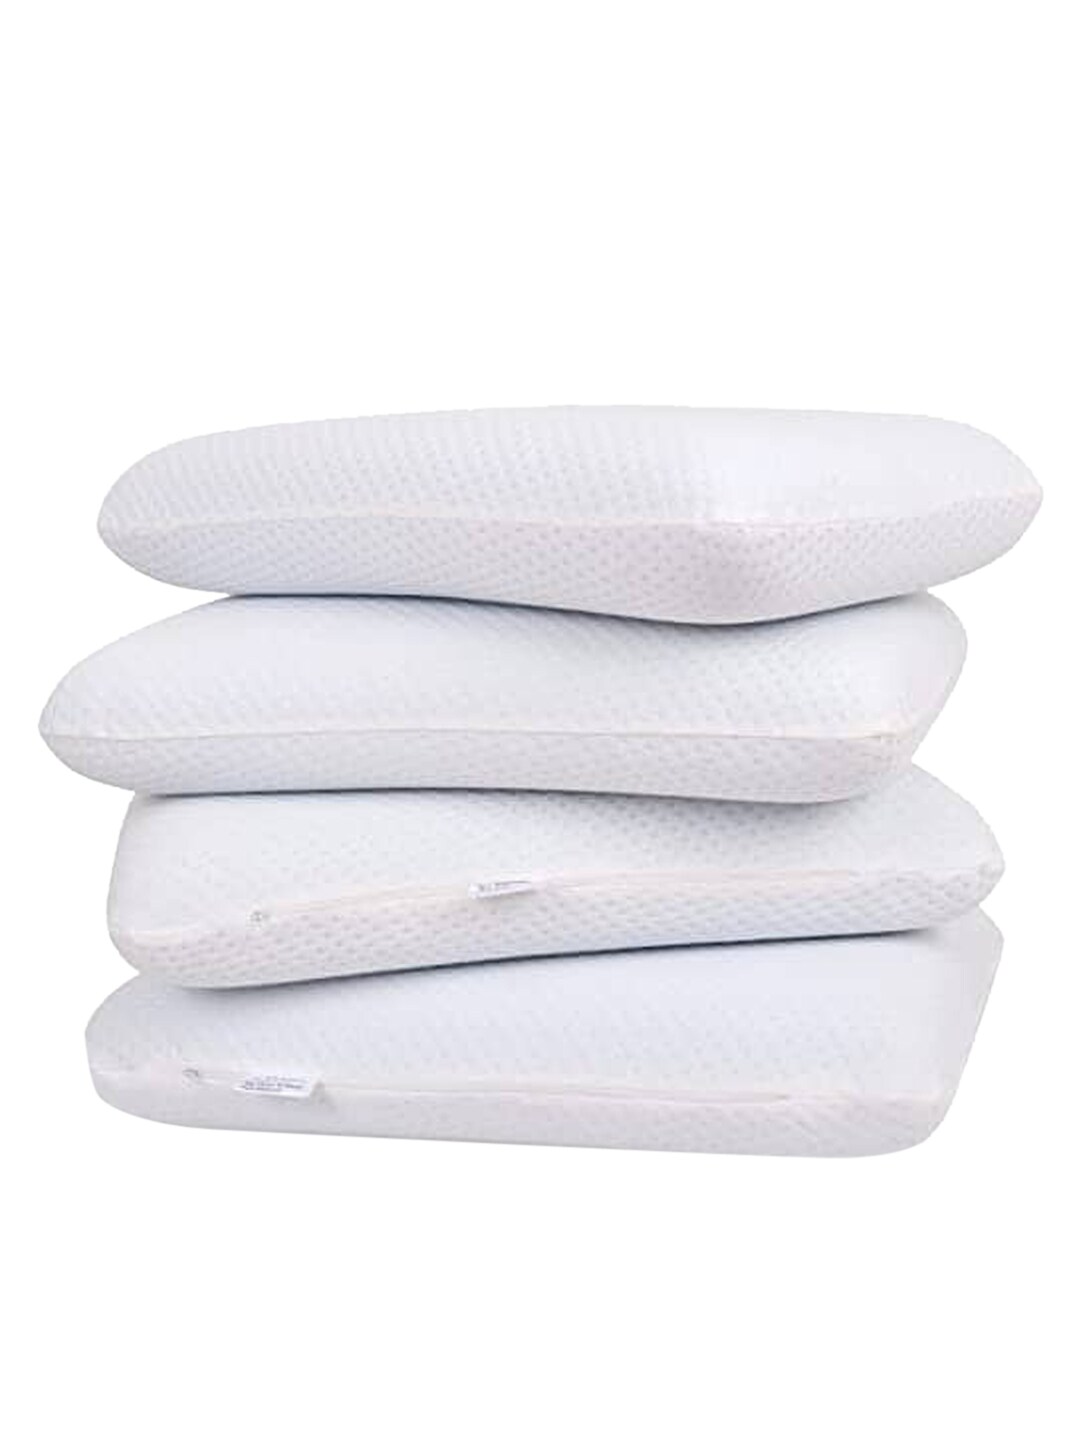 Sleepsia White Pack of 4 Solid Pillows Price in India